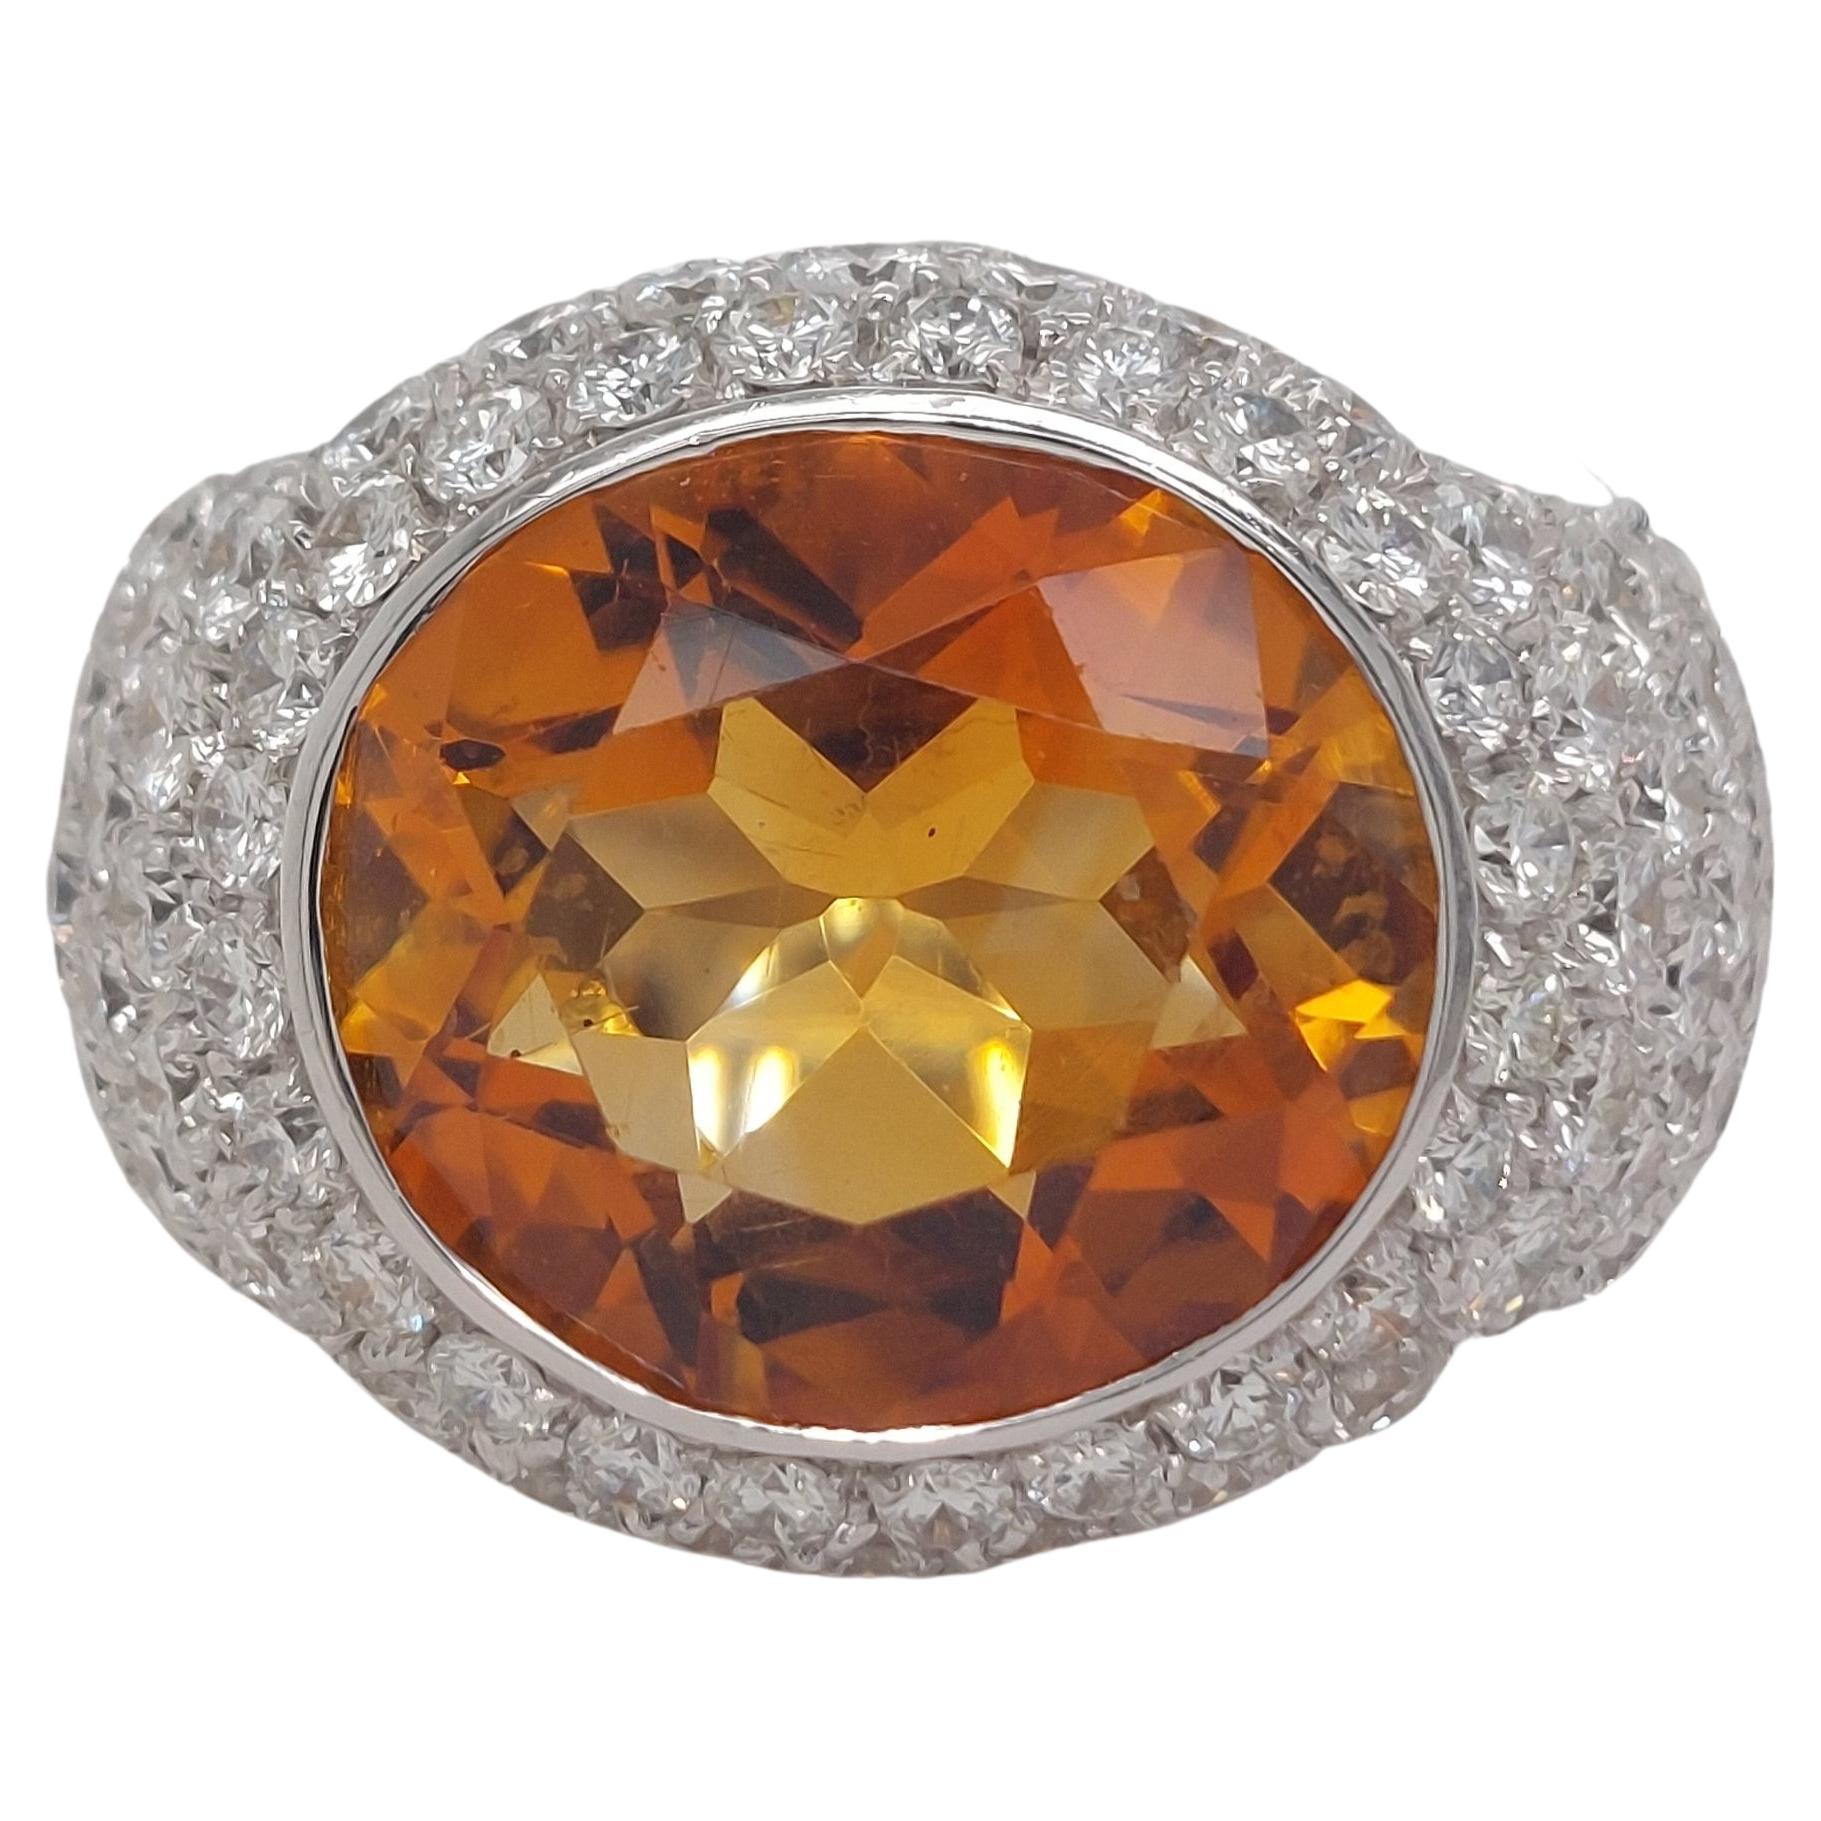 Stunning 18kt Solid White Gold Ring with 6.4ct Diamonds and Big Citrine Stone For Sale